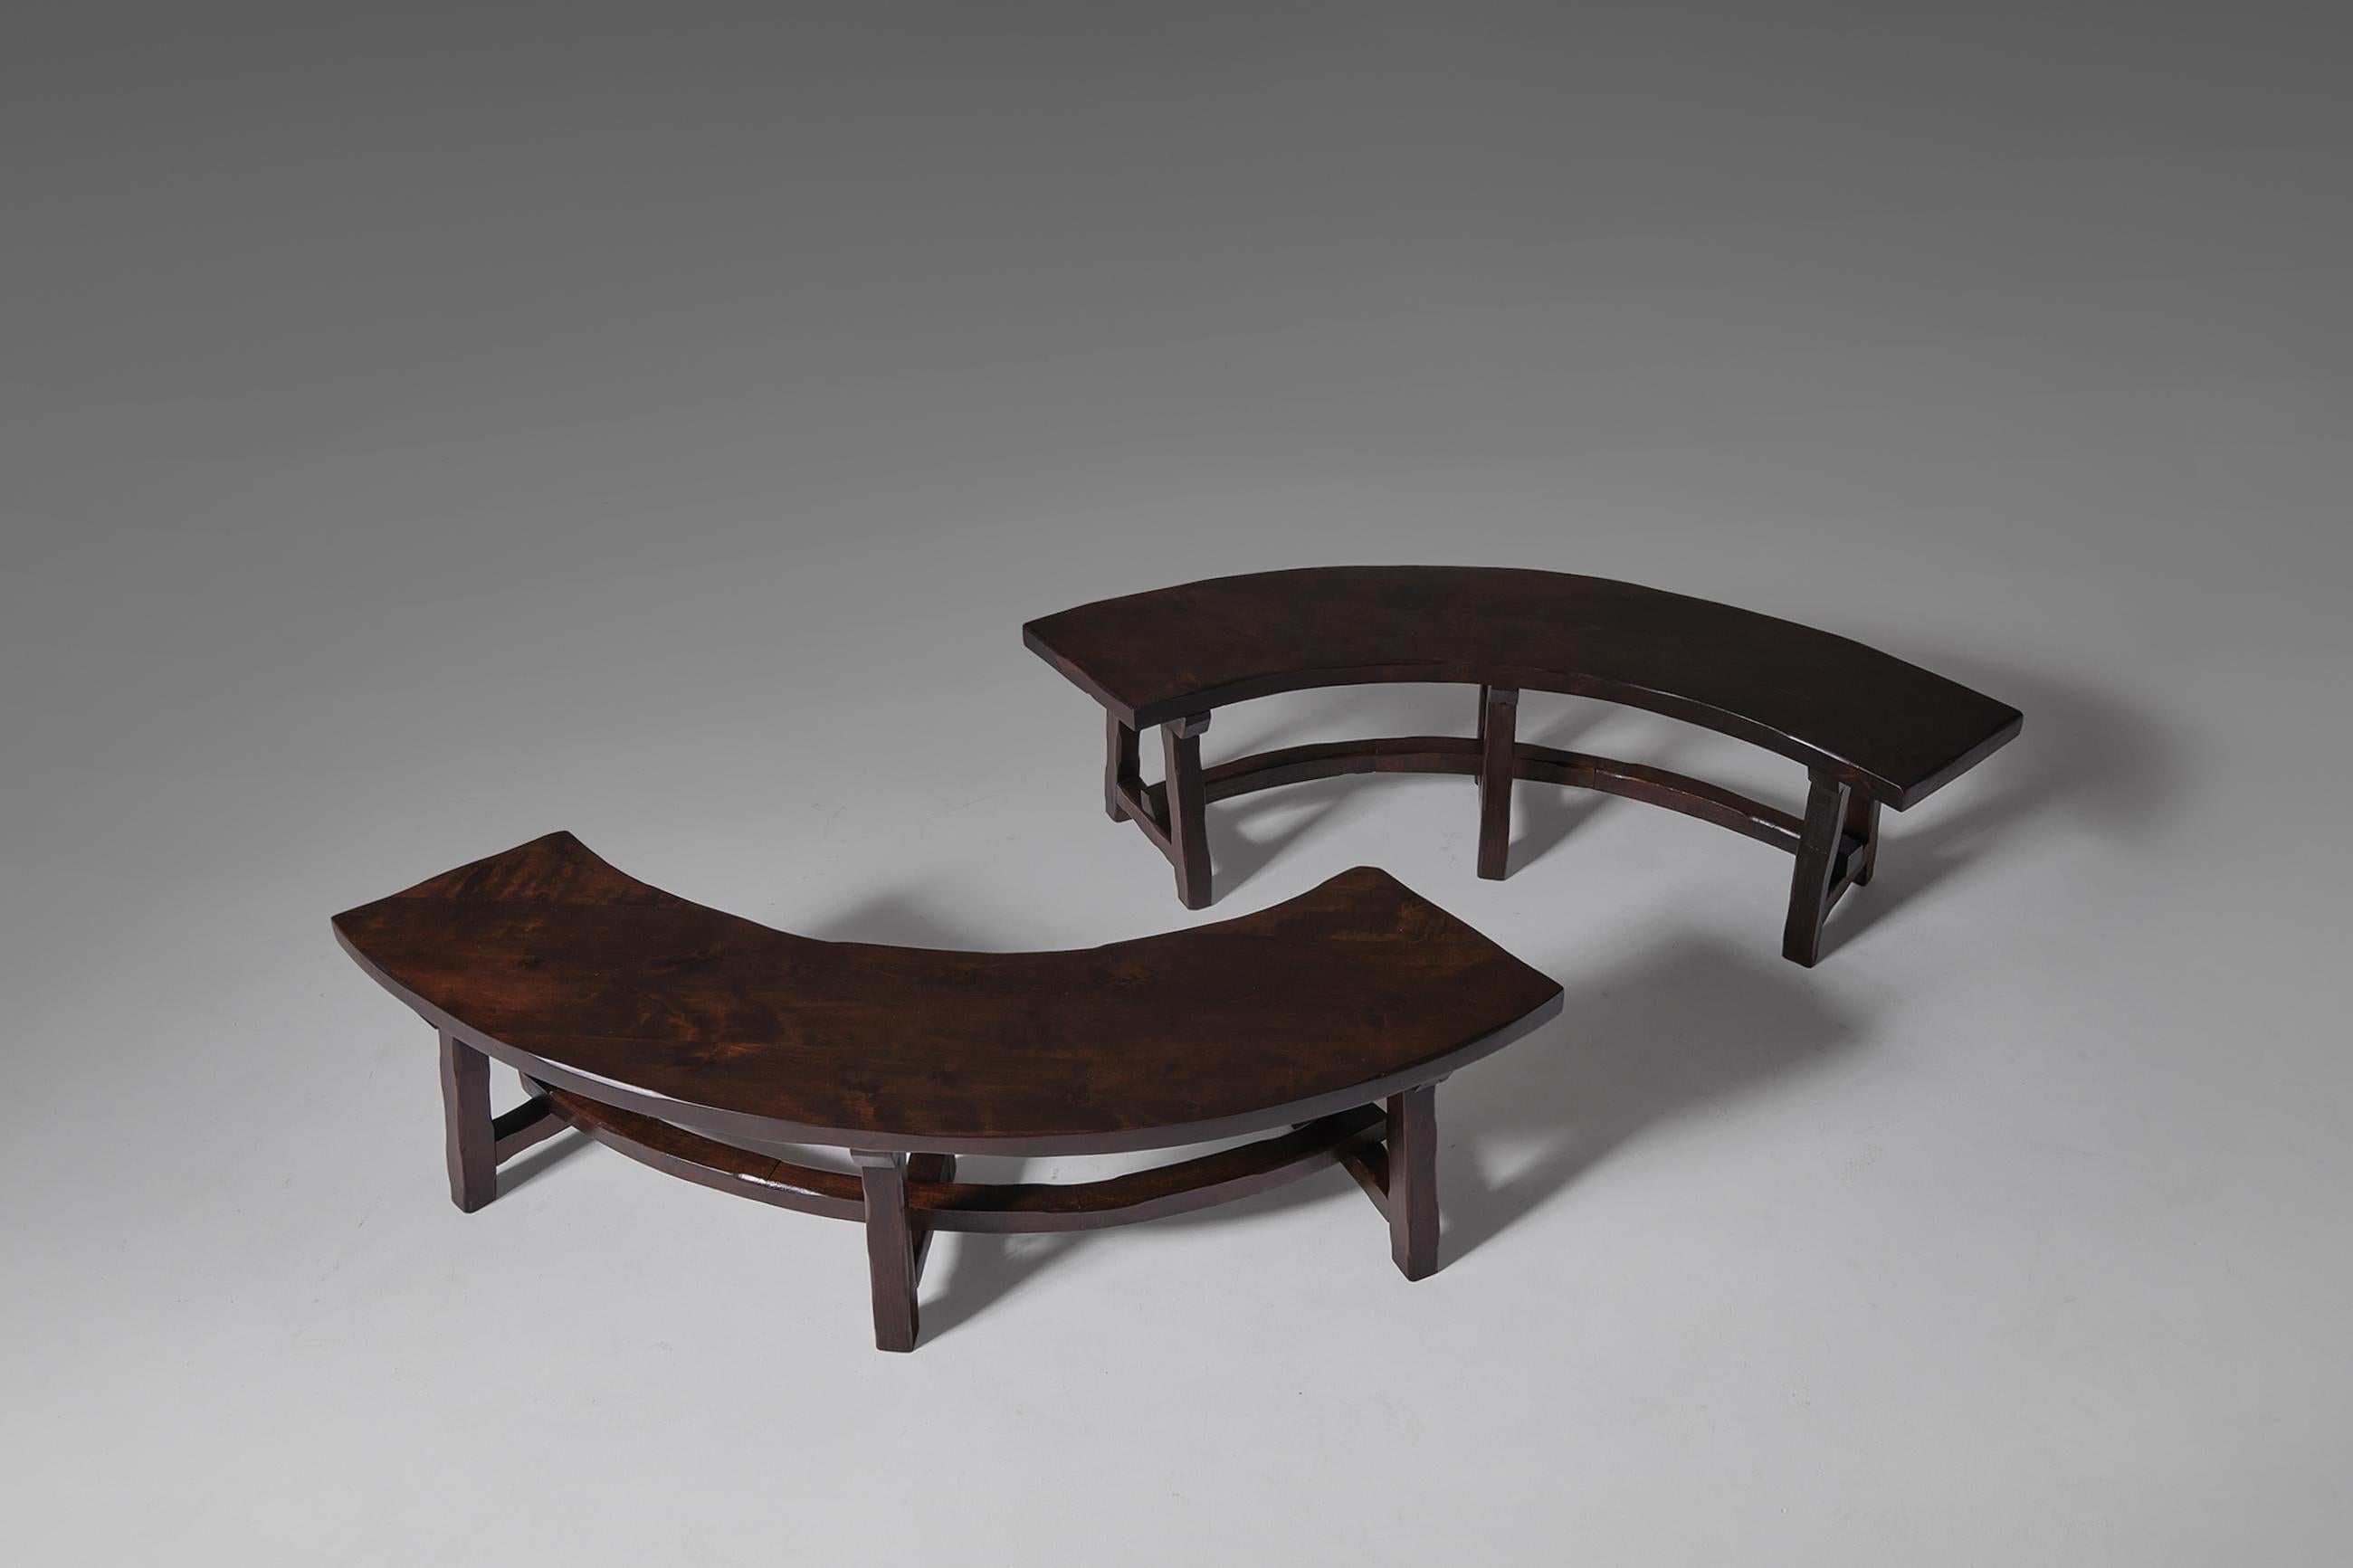 Primitive stained ash wooden benches, France 1970's. The set is constructed out of solid dark stained Ash wood with nice warm tones. Every single element is carved by hand, this causes a very nice artisan character. Every bench can accommodate 2